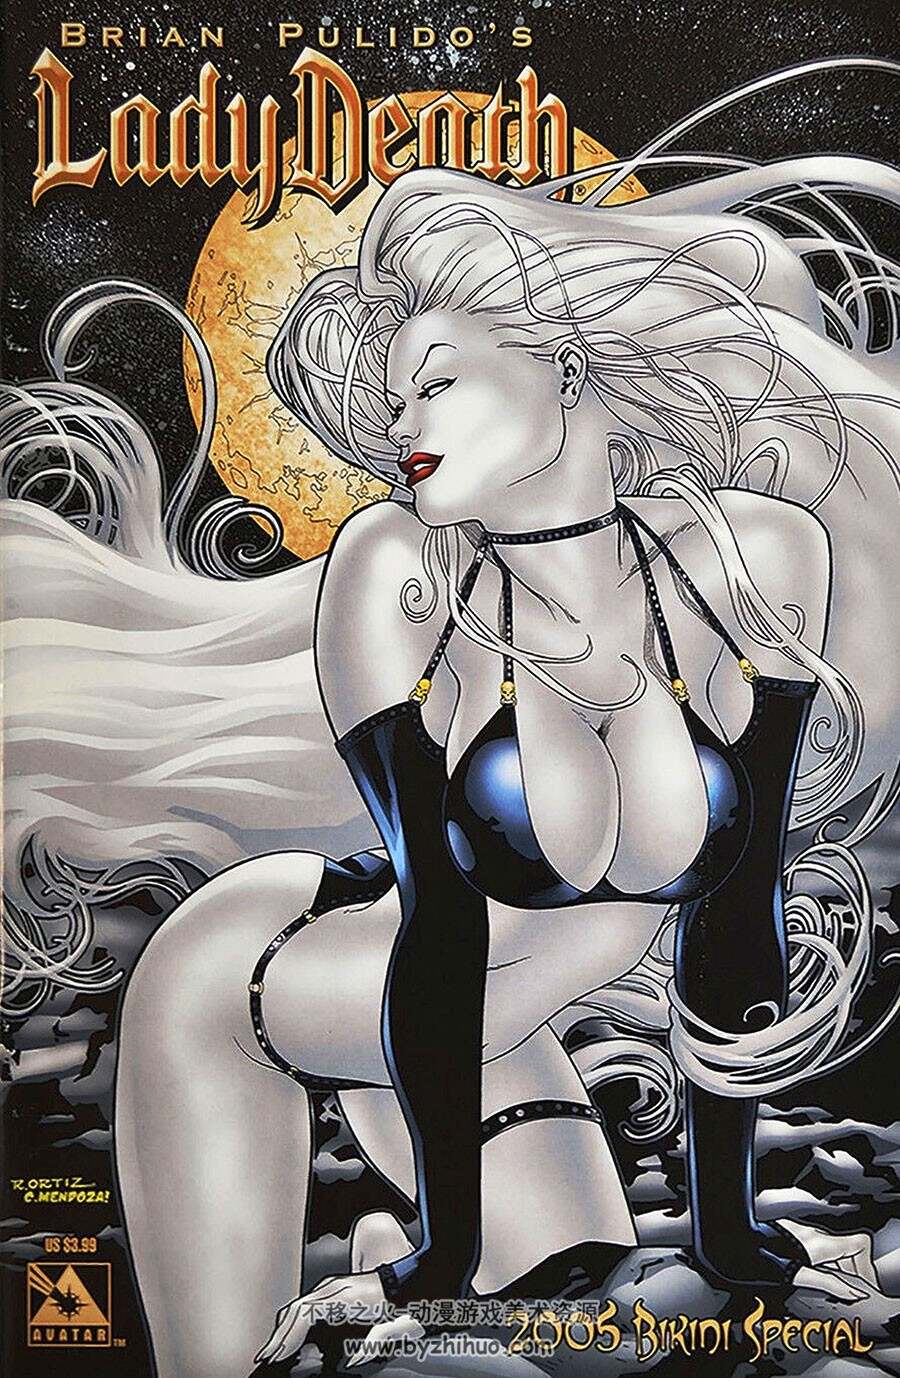 Brian Pulido's Lady Death - Queen of the Dead 全一册 Brian Pulido 内附插画集